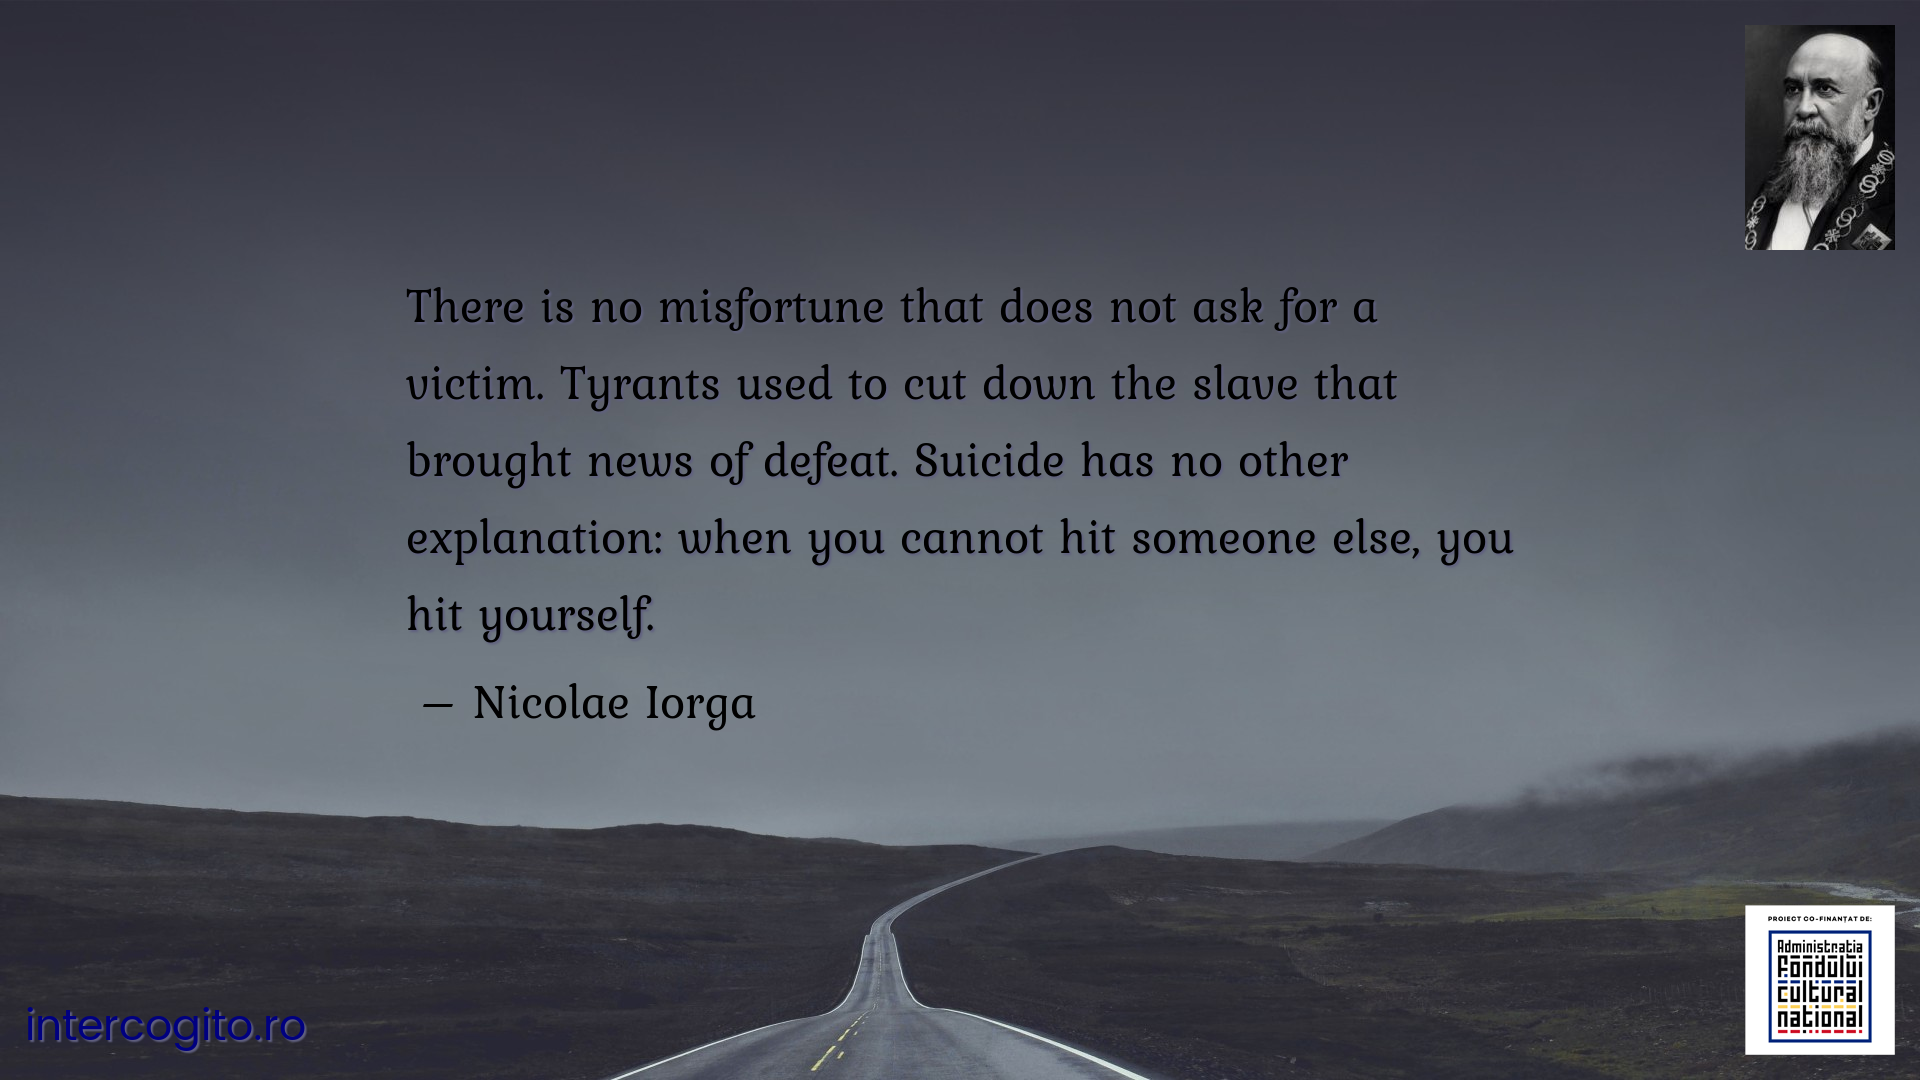 There is no misfortune that does not ask for a victim. Tyrants used to cut down the slave that brought news of defeat. Suicide has no other explanation: when you cannot hit someone else, you hit yourself.